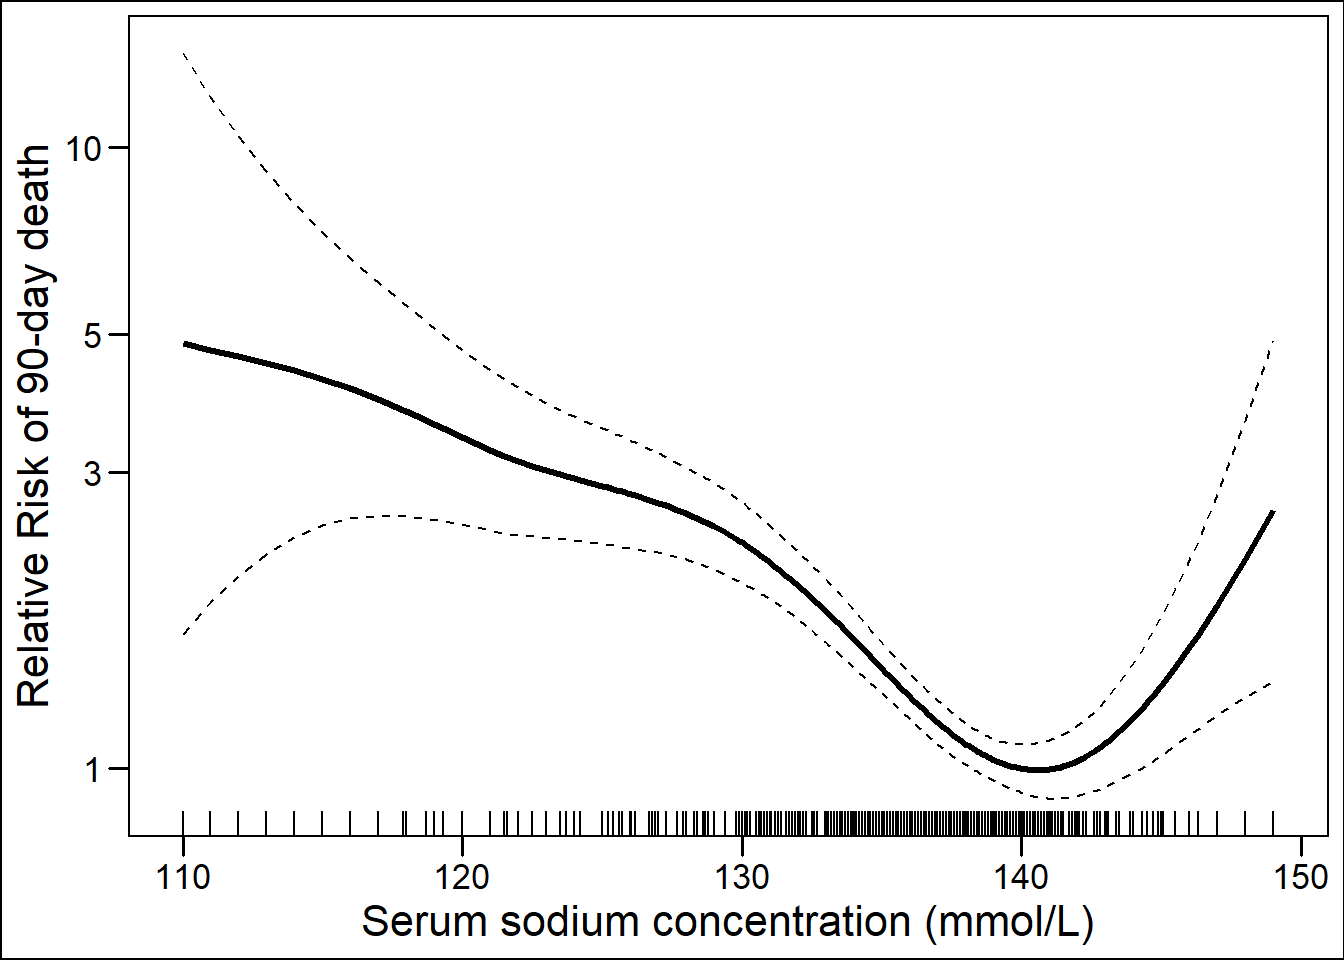 Generalized additive Cox model with spline showing the effect of serum sodium at listing on 90-day mortality, corrected for the MELD score.